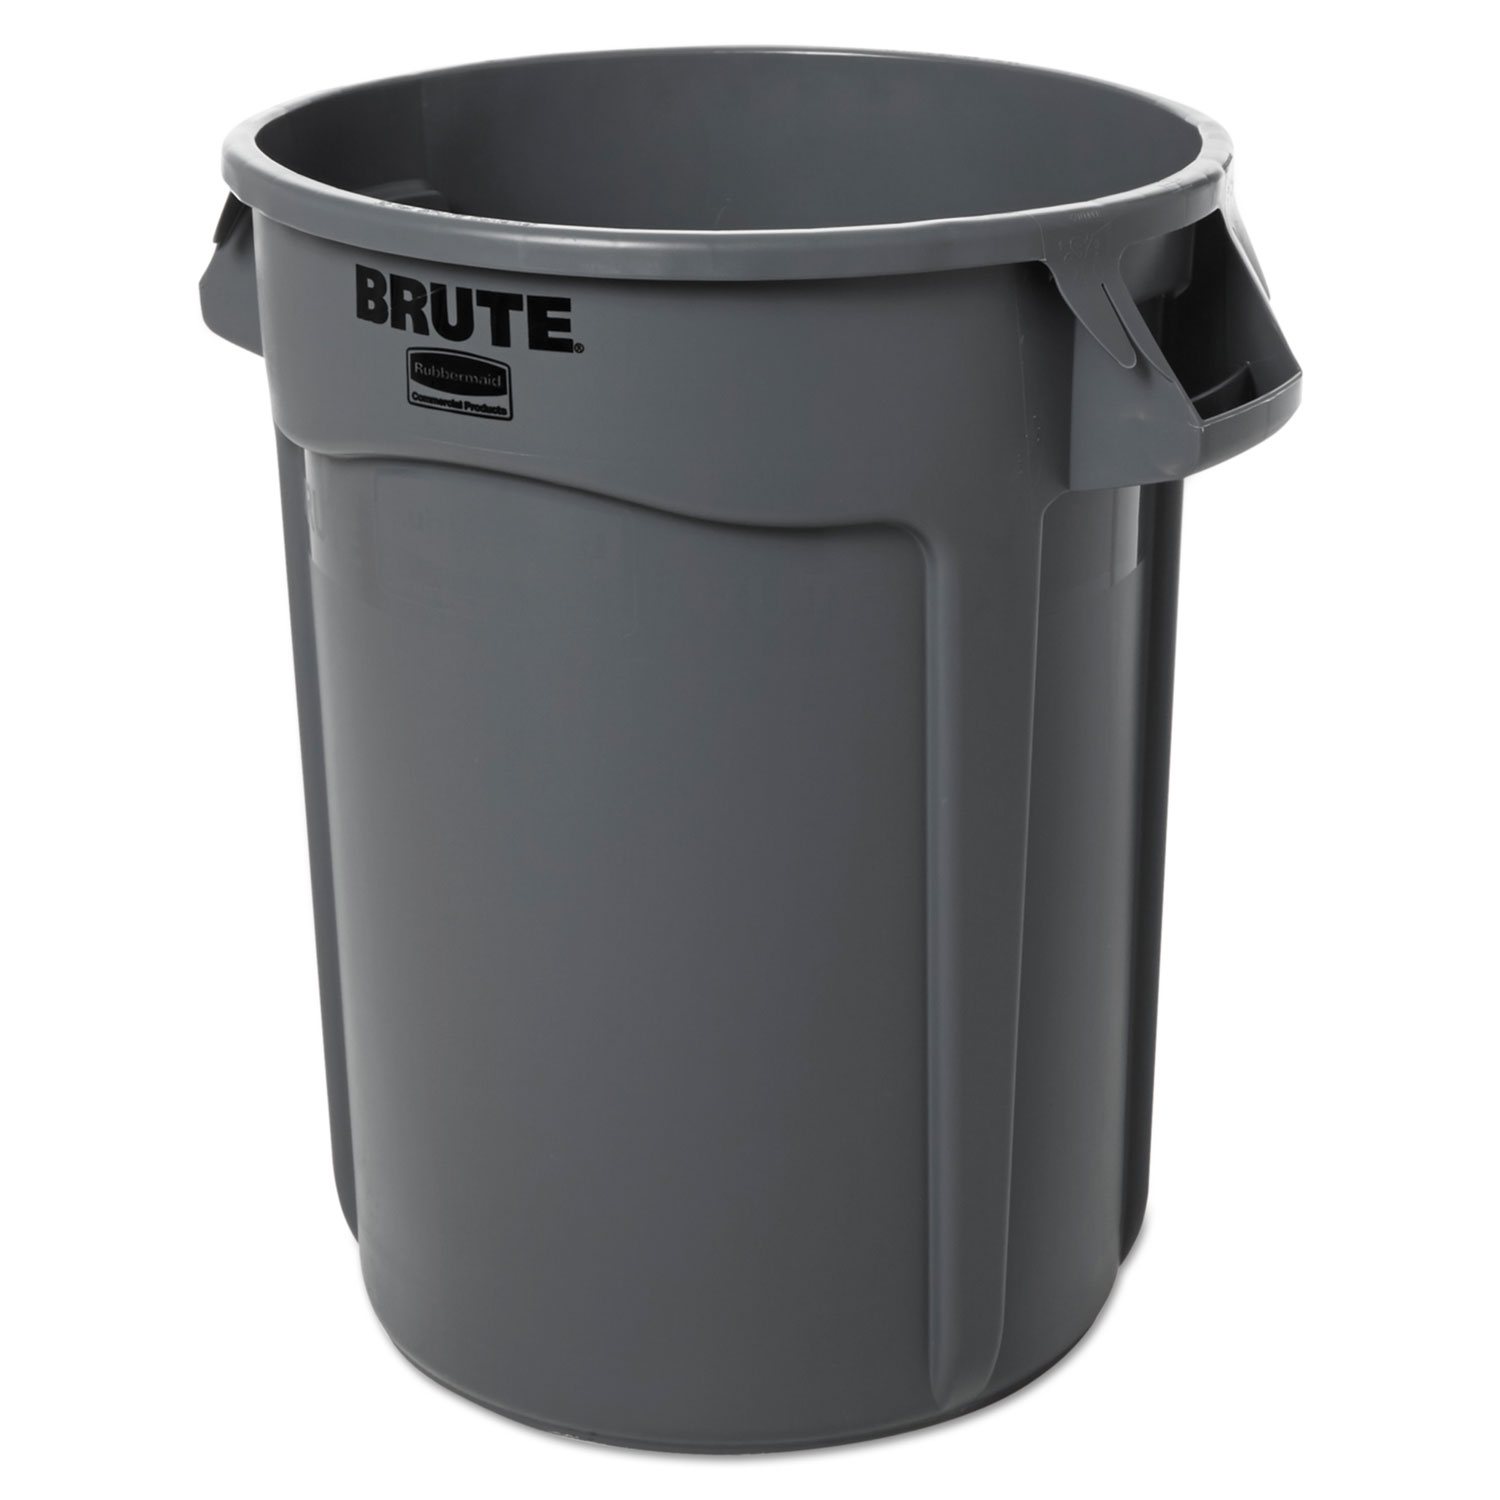  Rubbermaid Commercial FG263200GRAY Round Brute Container, Plastic, 32 gal, Gray (RCP263200GY) 